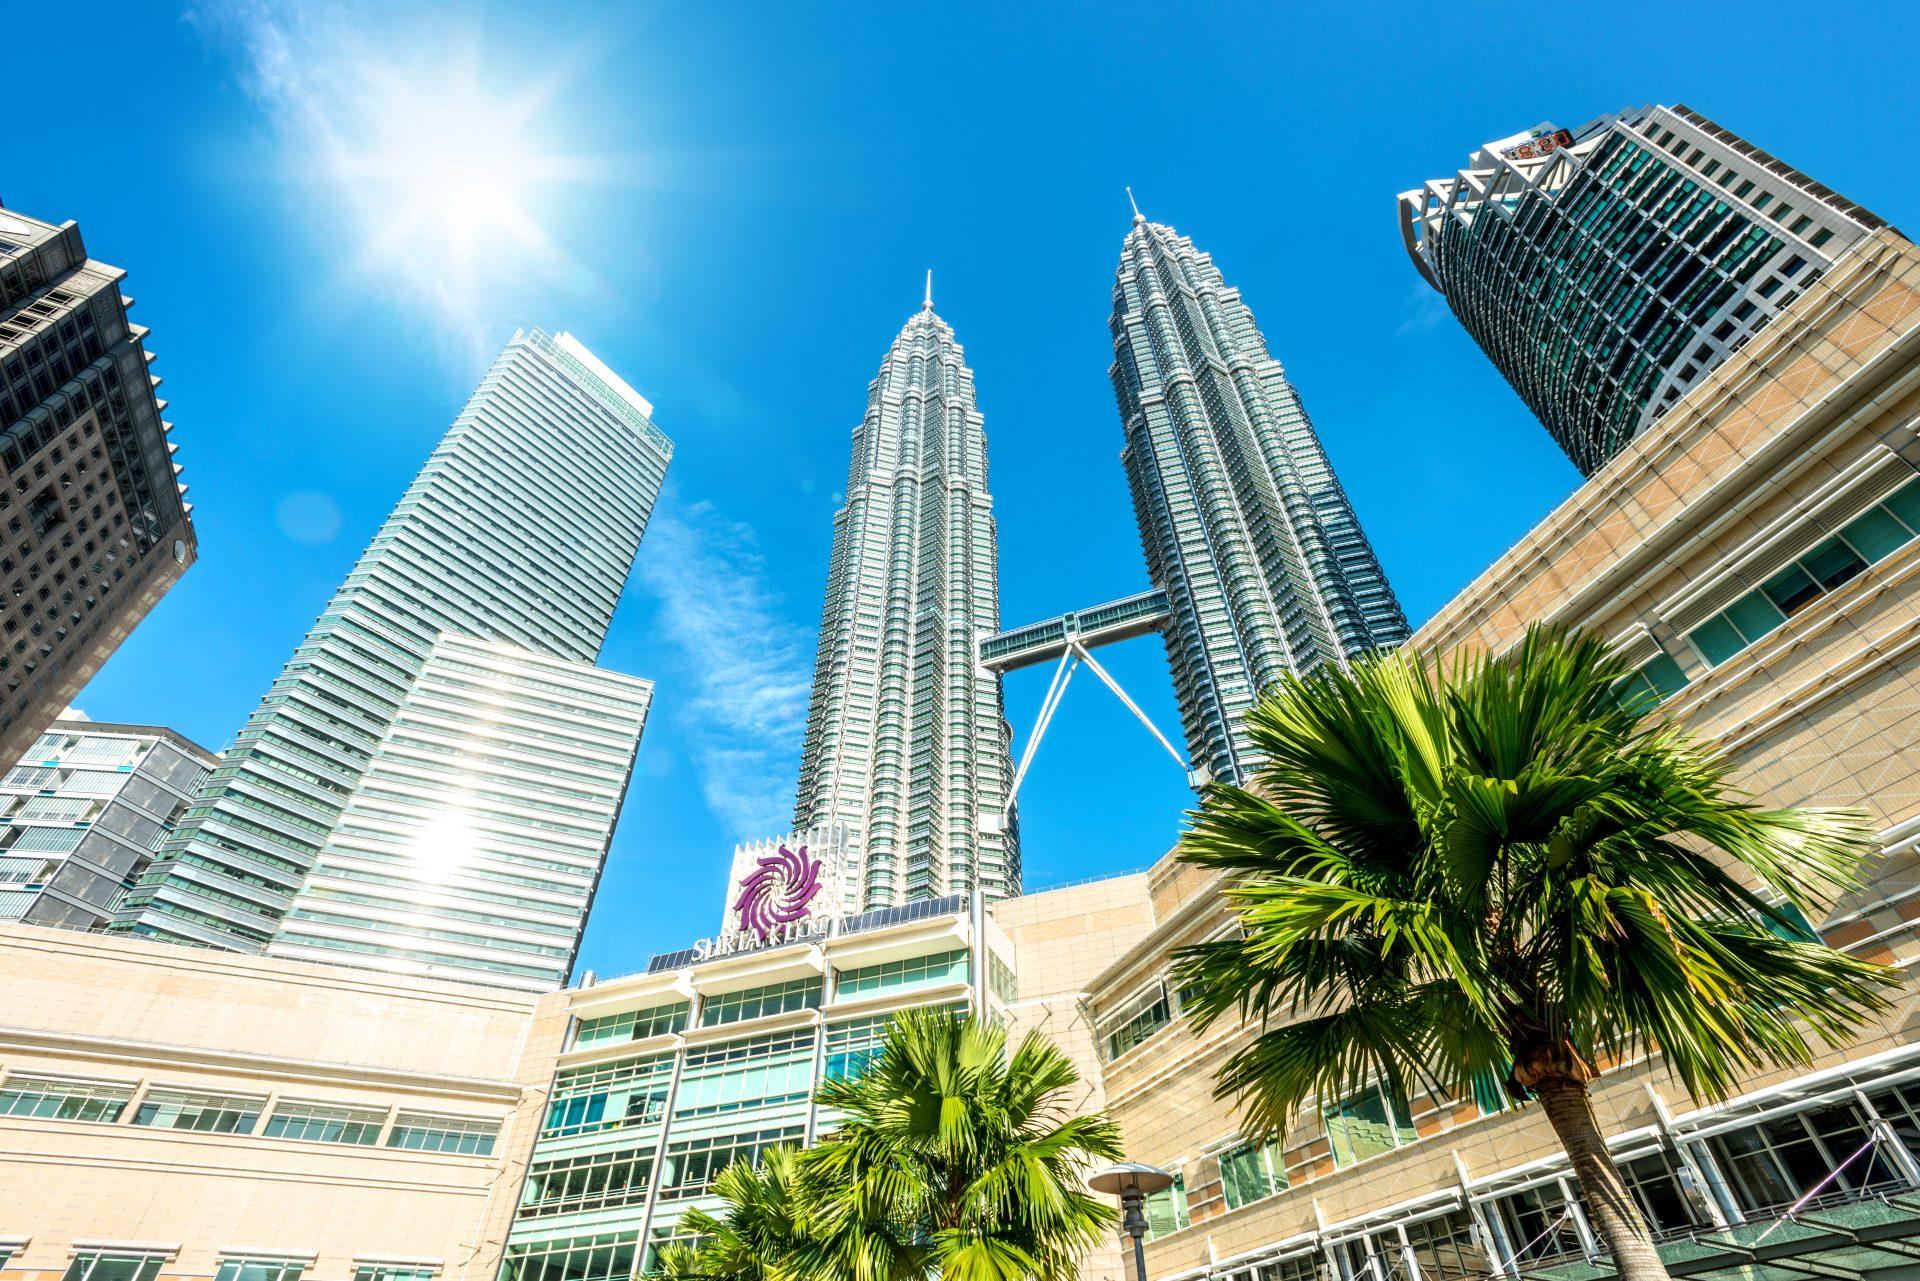 How To Get To Suria KLCC: From Driving To Public Transport